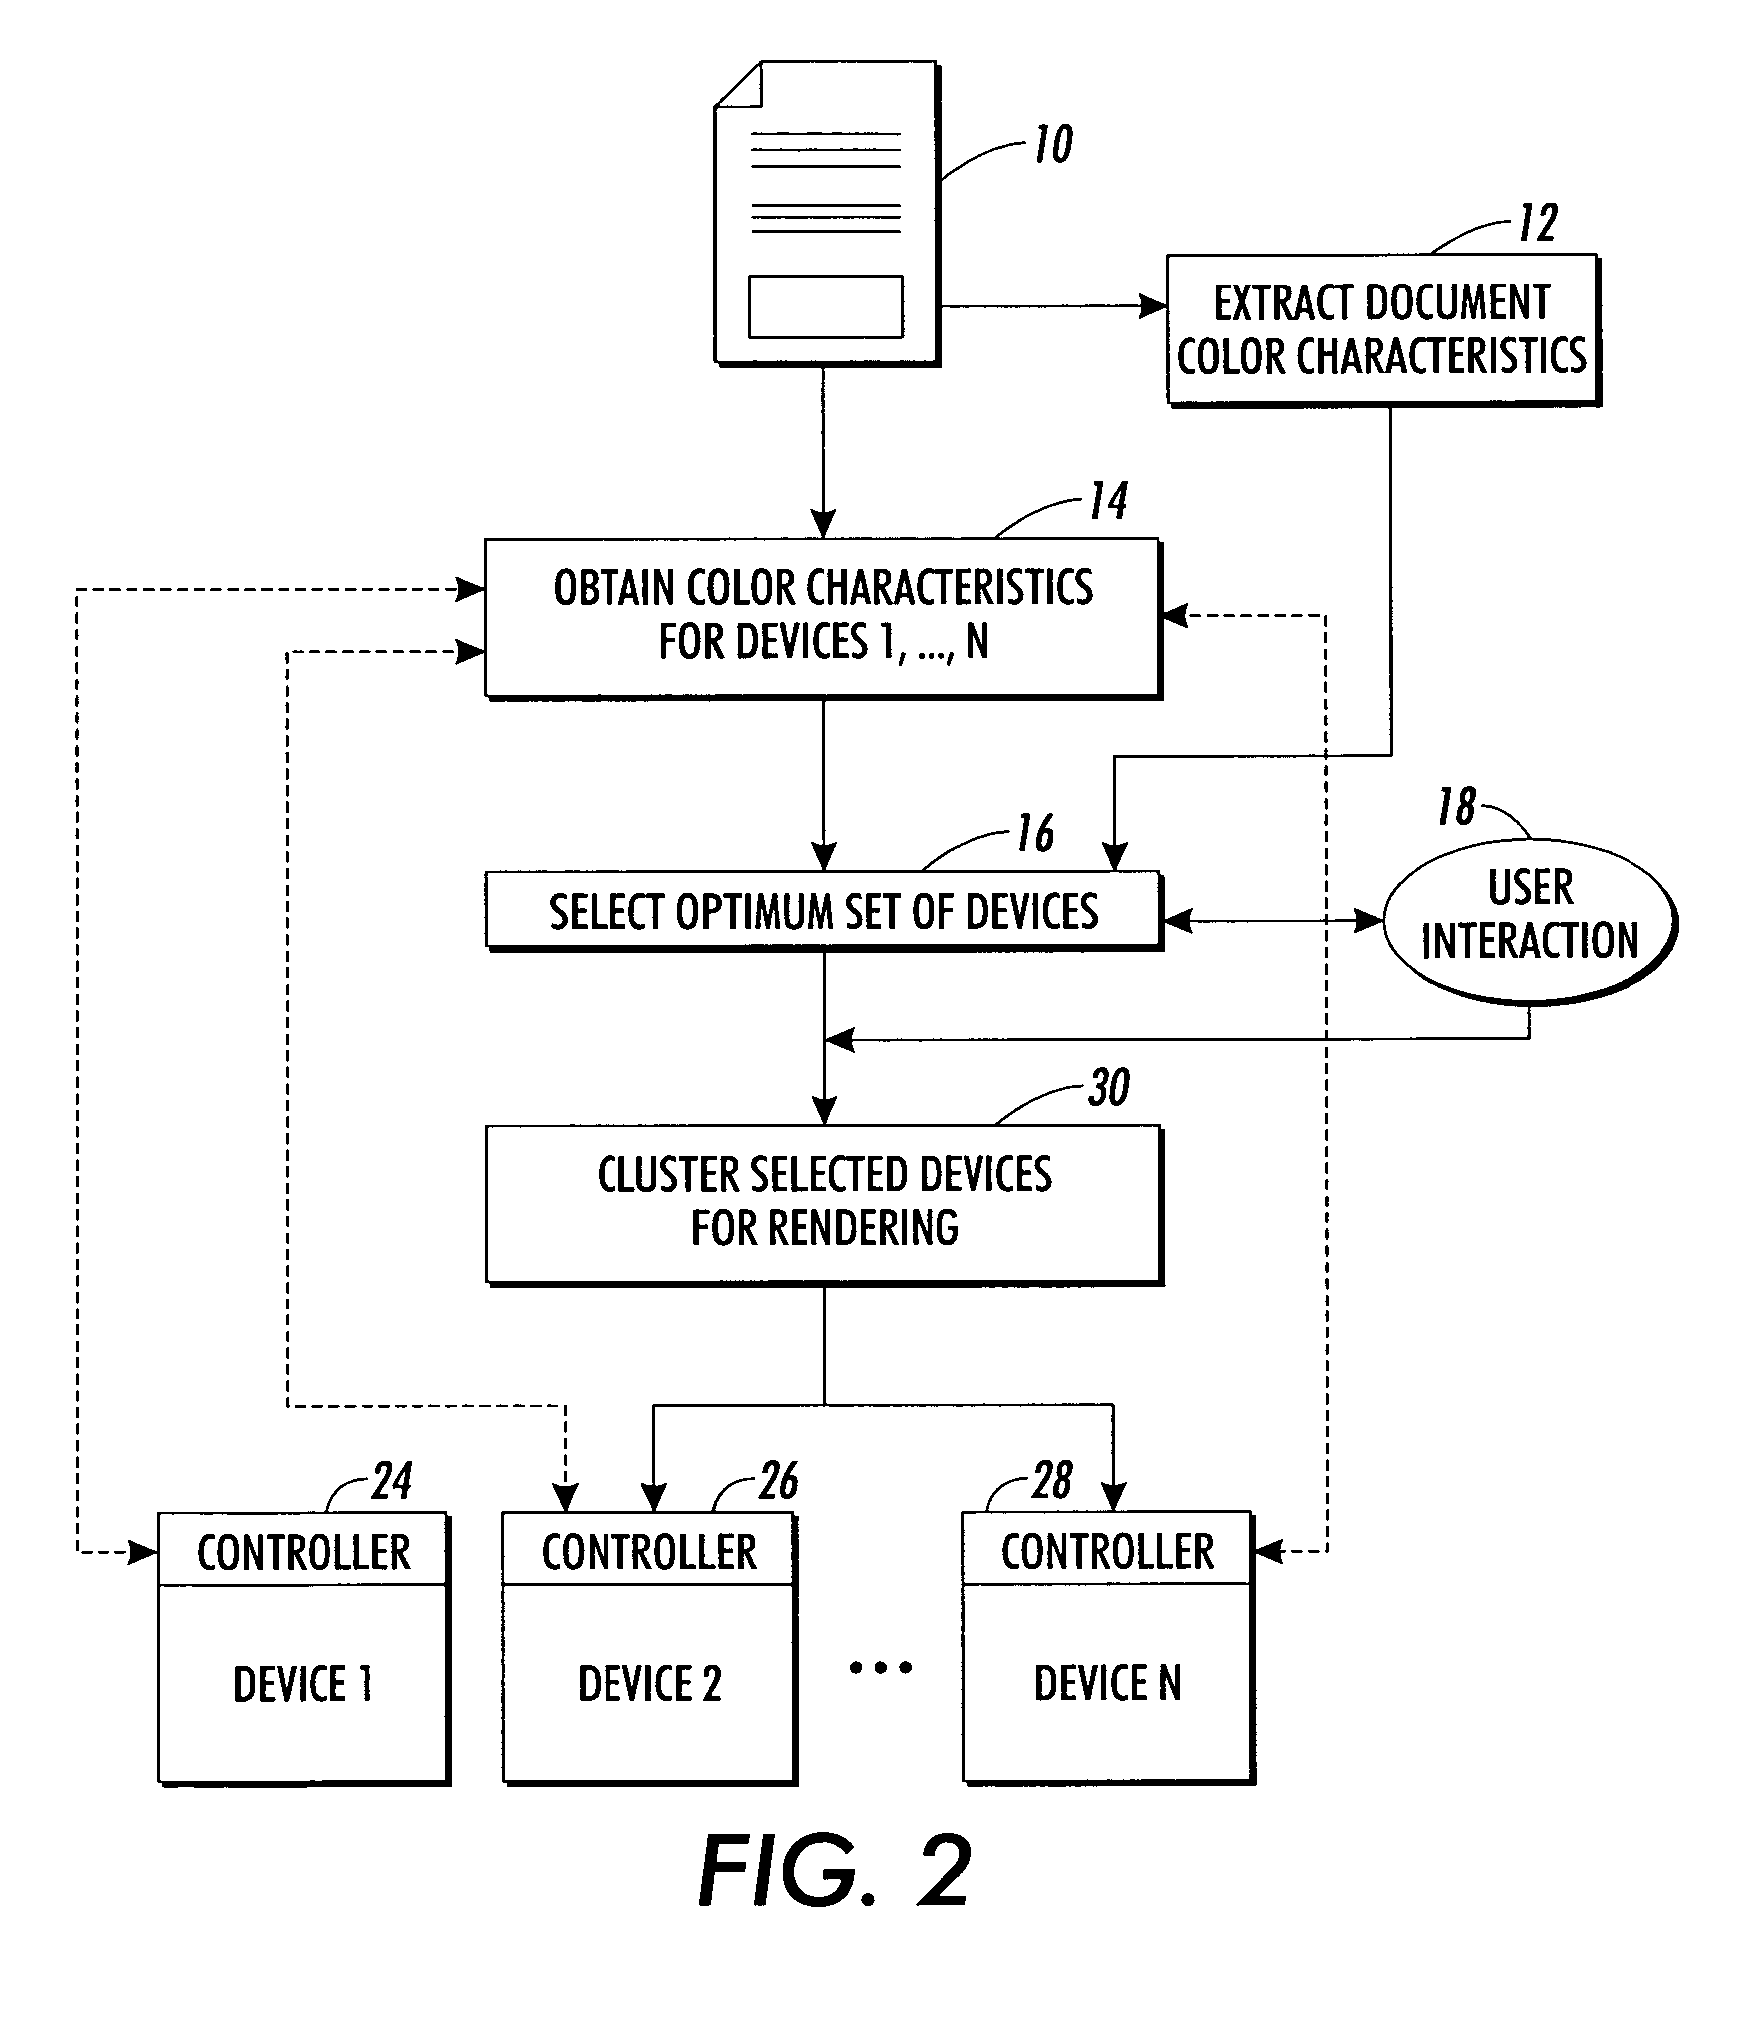 System and method for selecting the best set of devices for rendering color documents